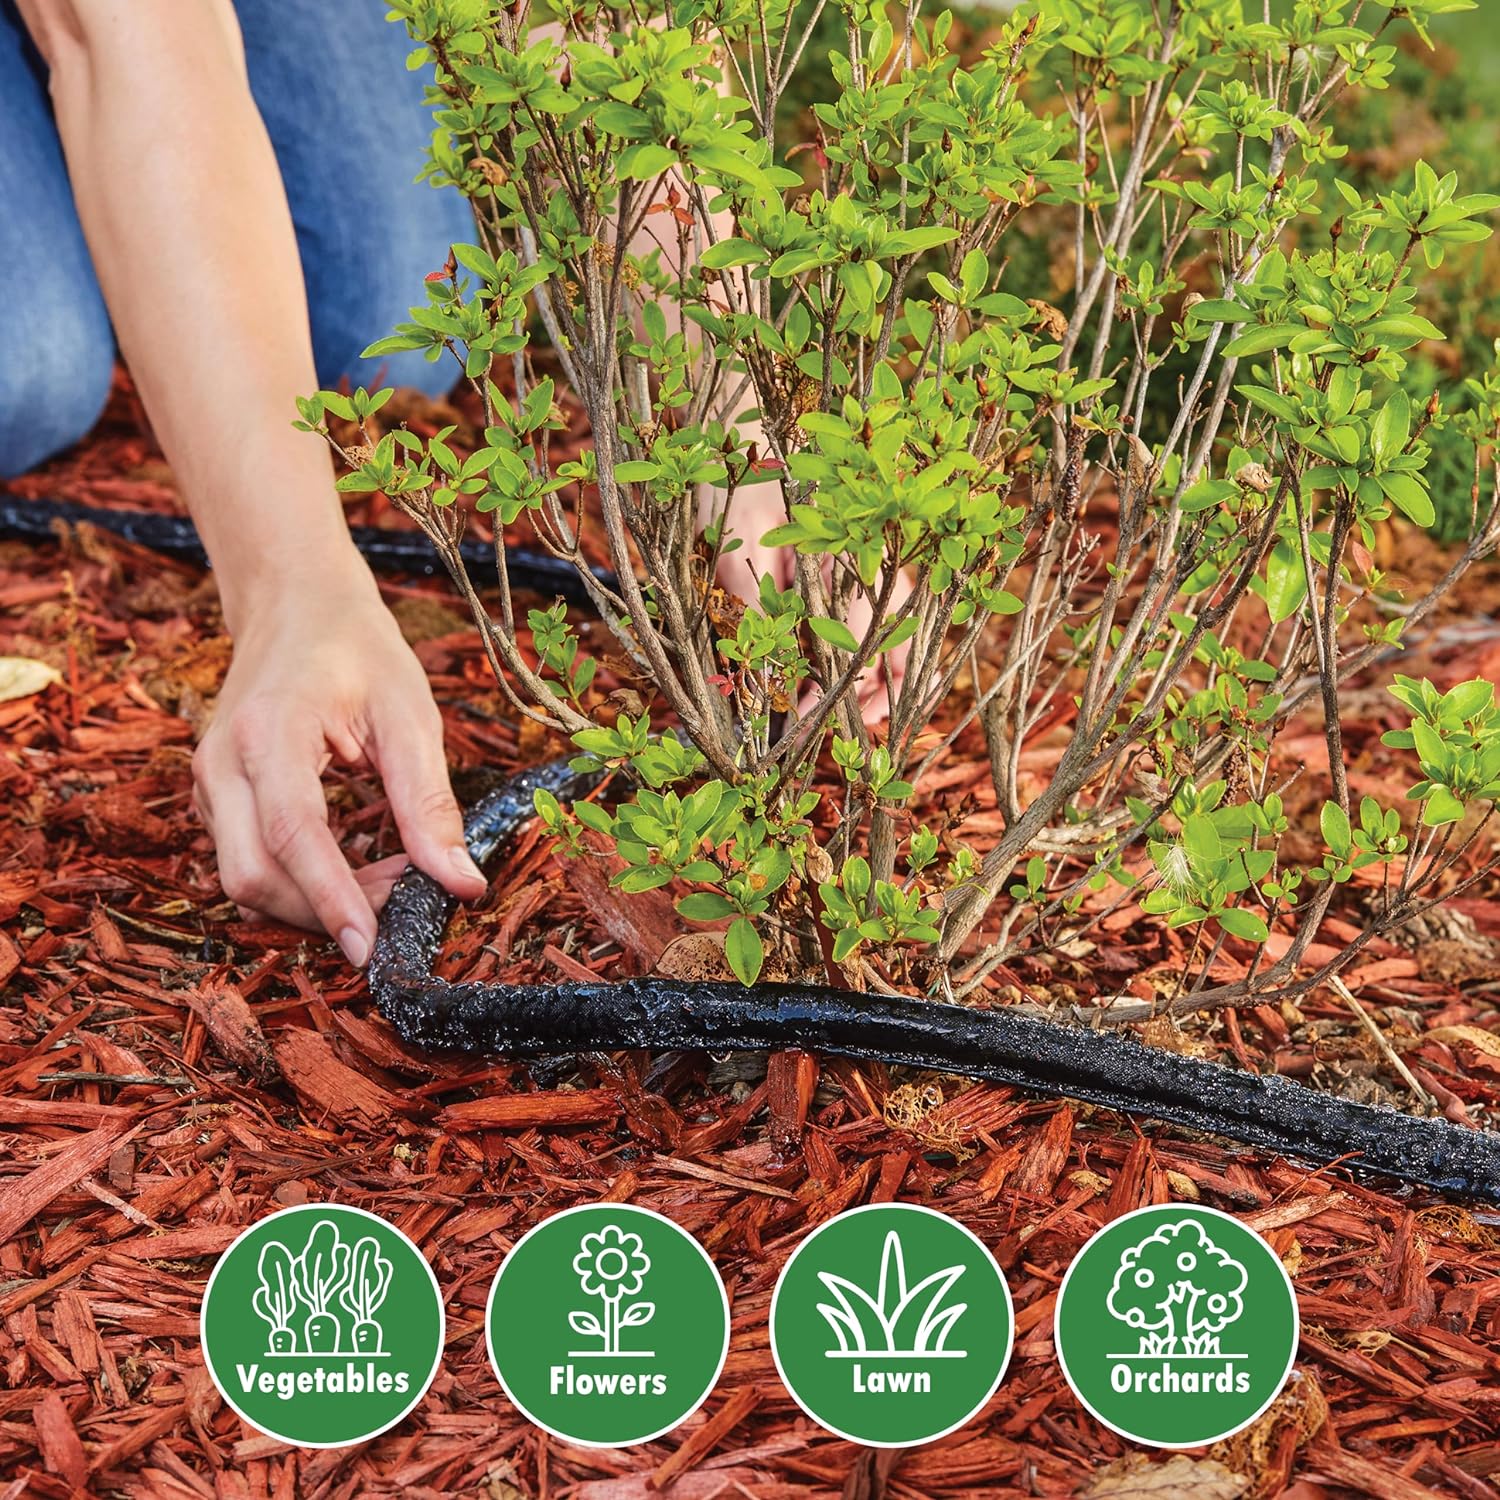 75ft Flat Soaker Hose - Reduces Water Consumption By 60%